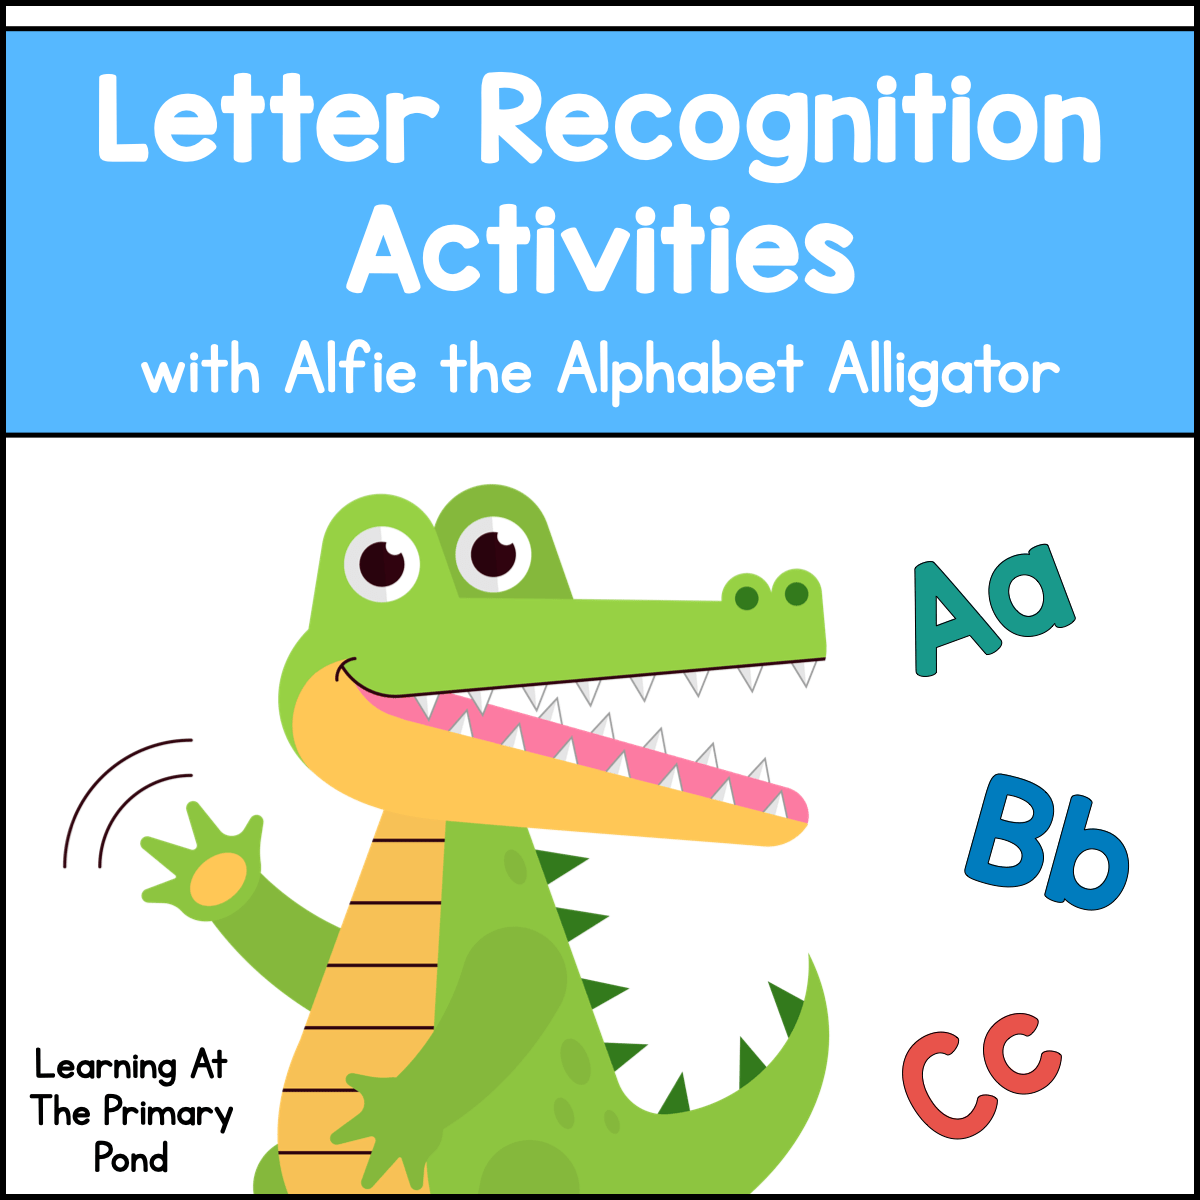 Letter Recognition Activities with Alfie the Alphabet Alligator - learning-at-the-primary-pond